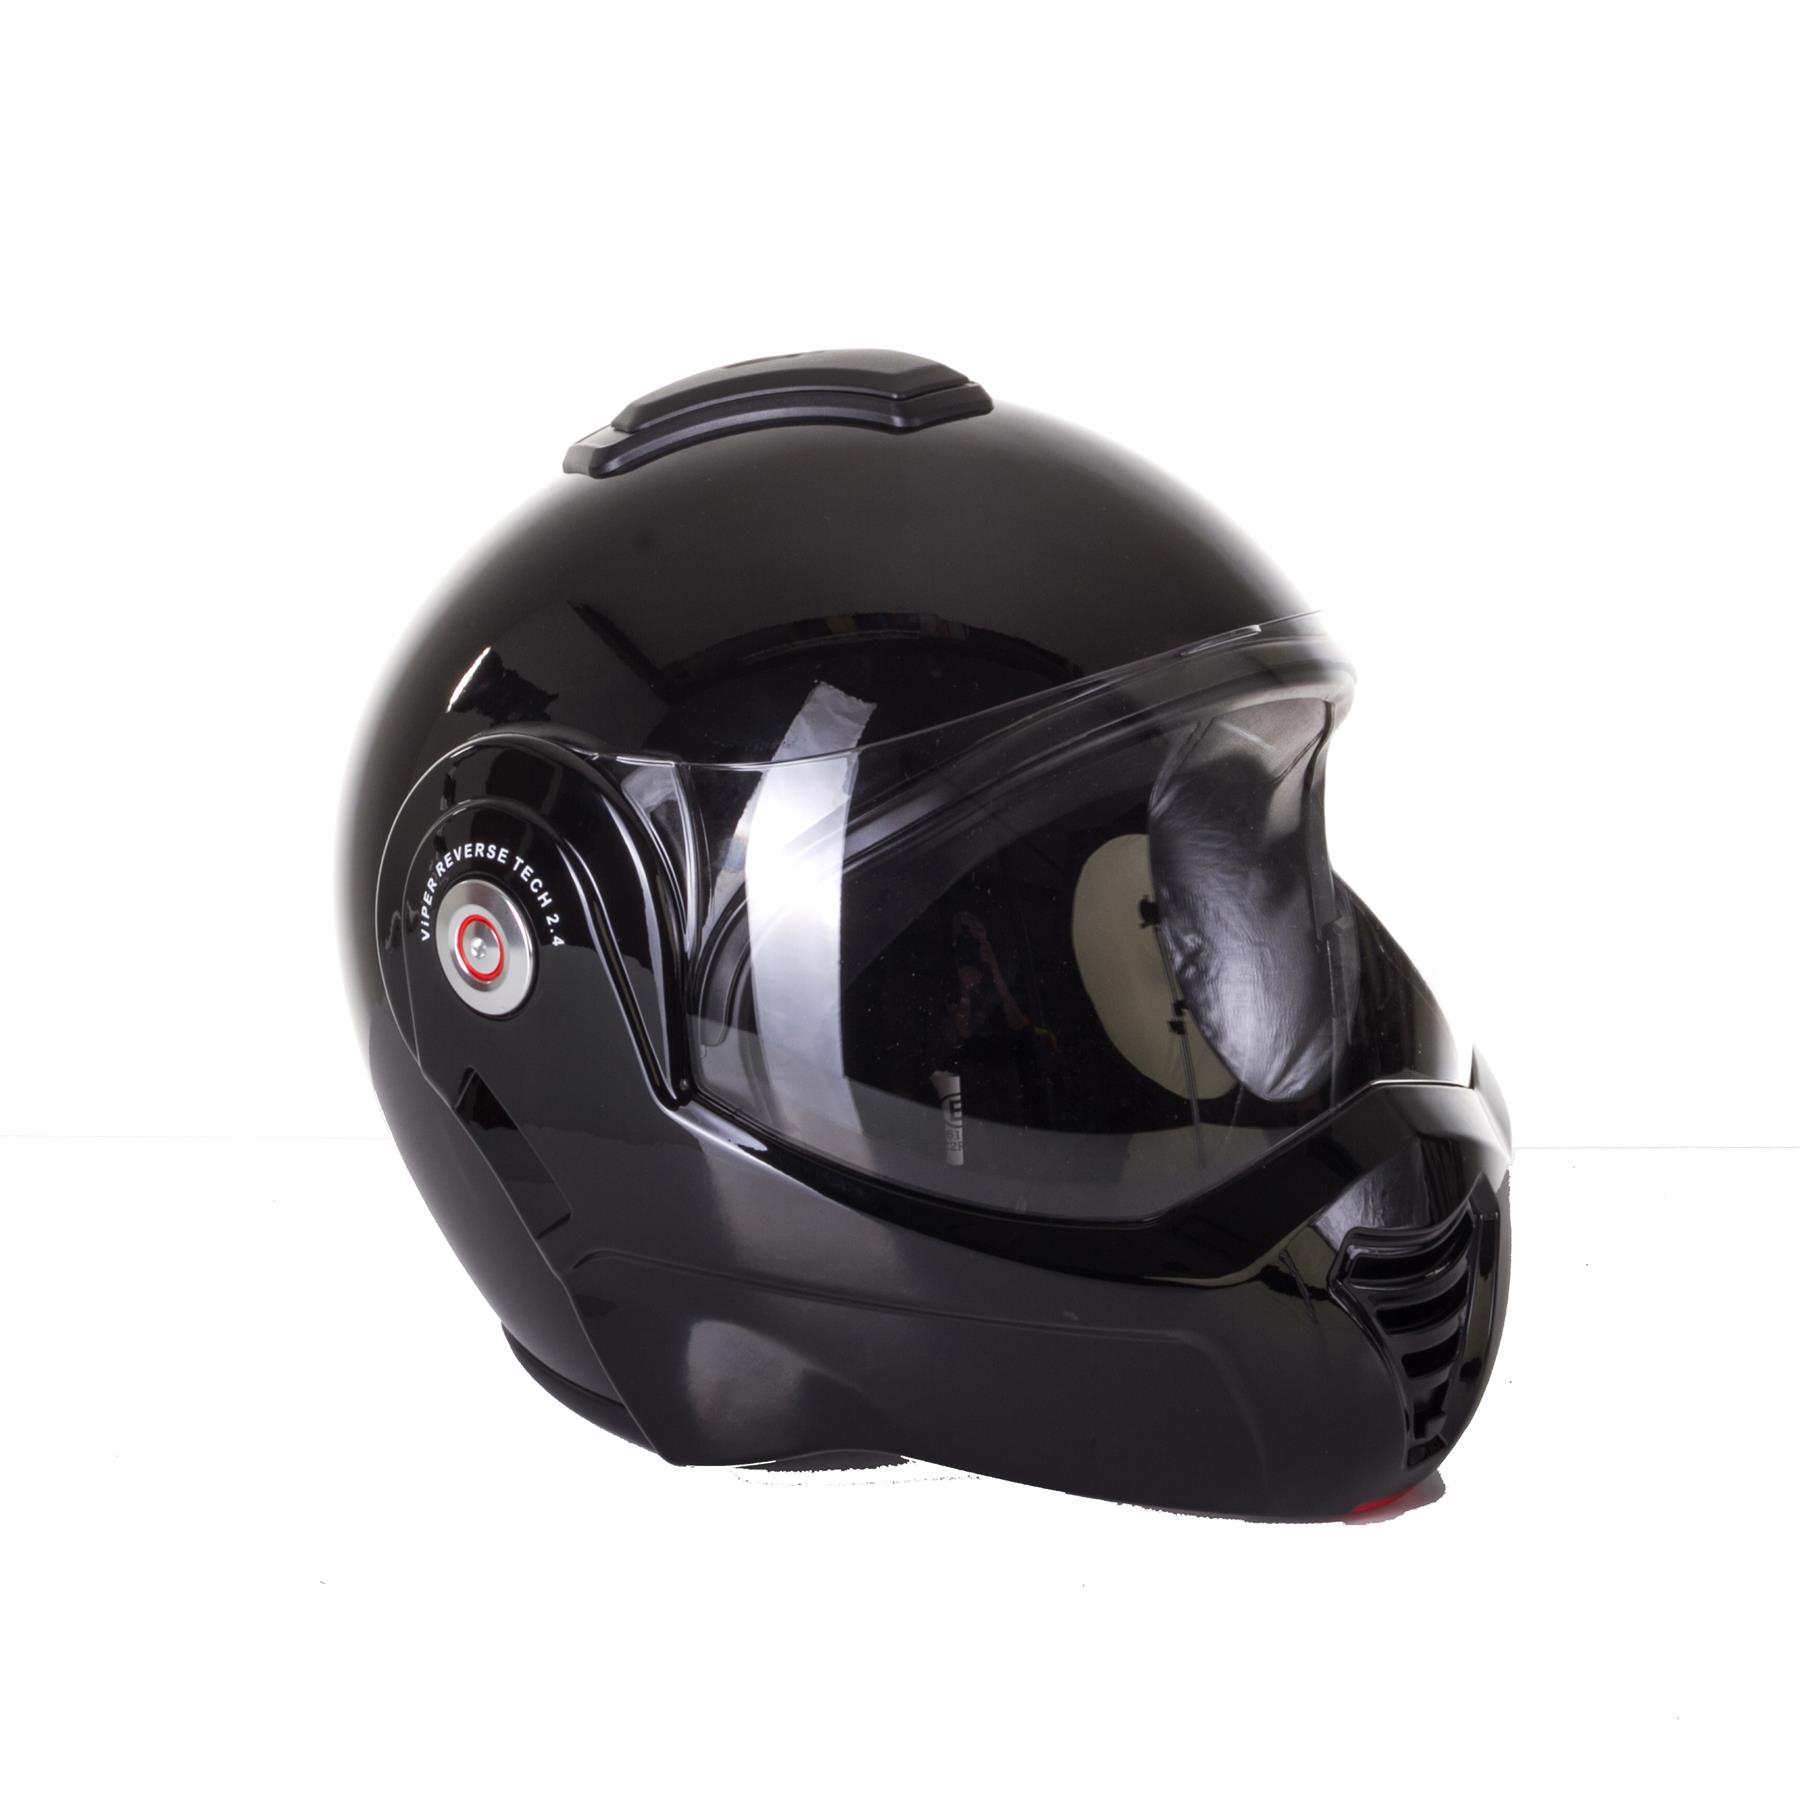 NEW ADULT MOTORBIKE VIPER RS202 REVERSE FLIP FRONT CRASH HELMET Motorcycle Moped Scooter Touring Sports Racing ECE Approve Open Full Face Modular Helmet